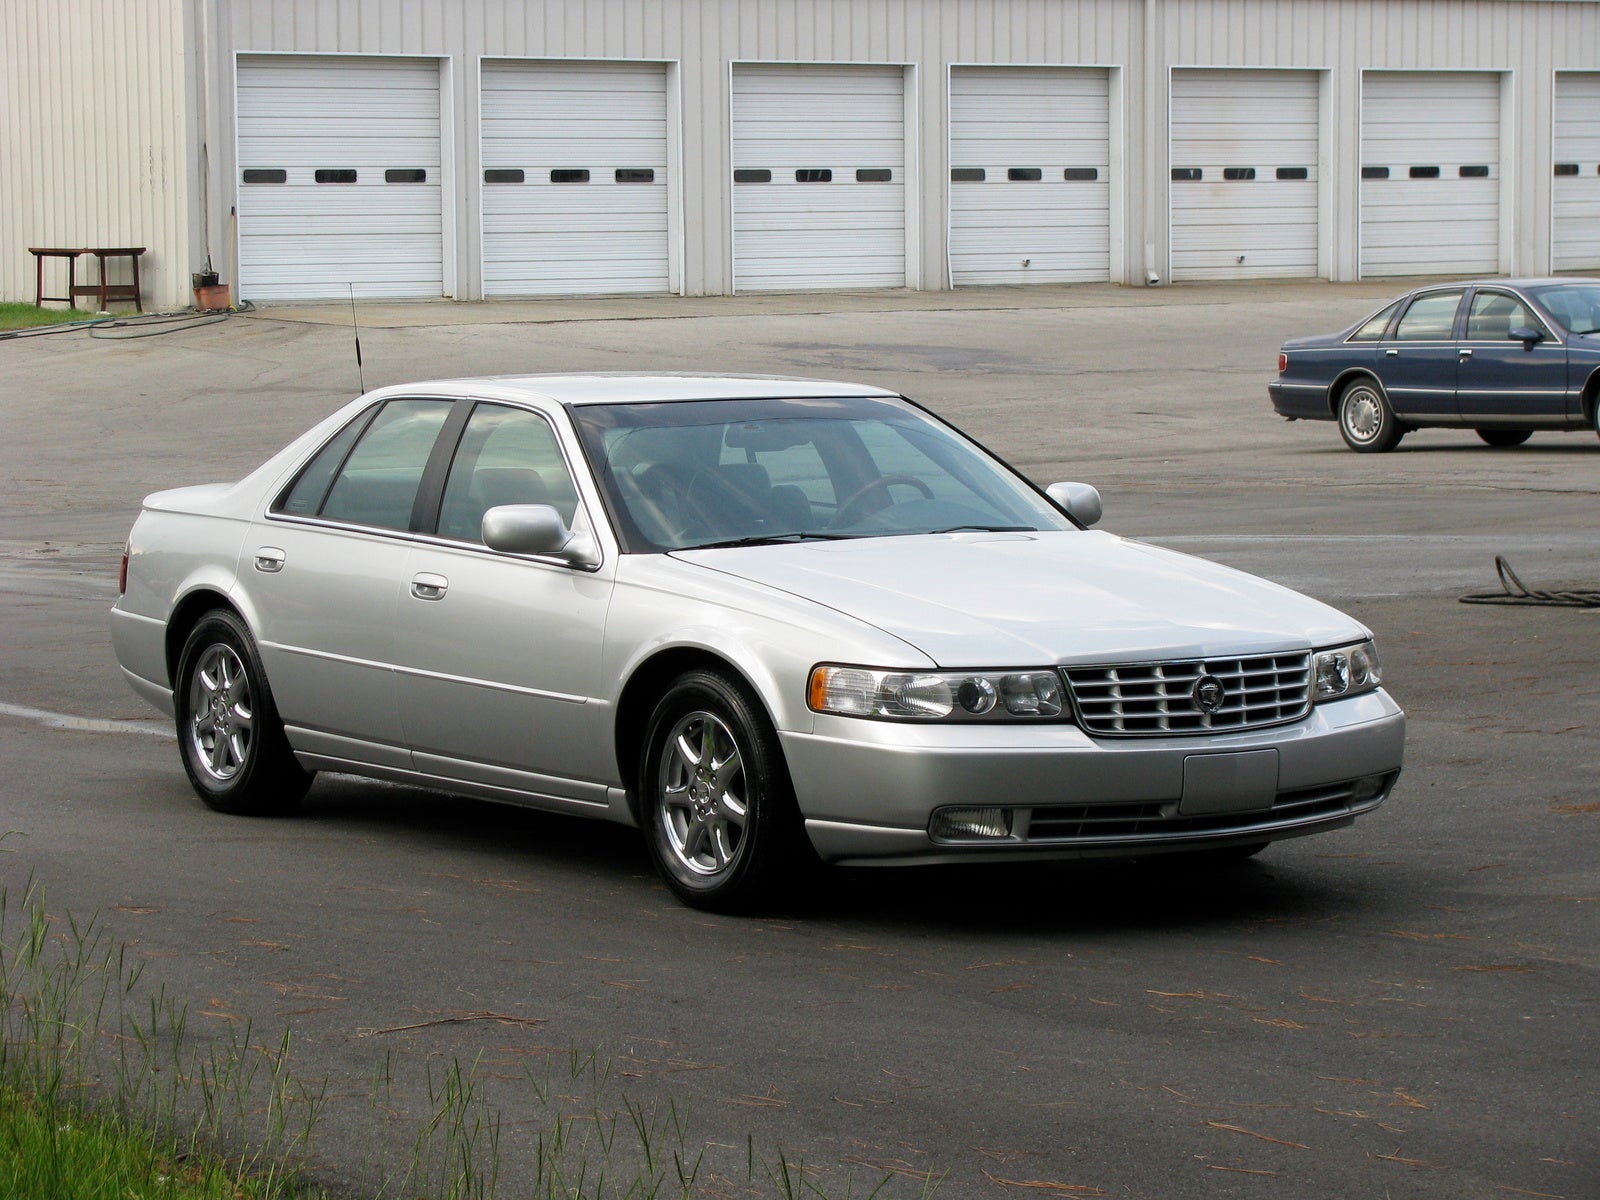 Cadillac  2008 on 2000 Cadillac Seville   Pictures   2000 Cadillac Seville Sts Pict